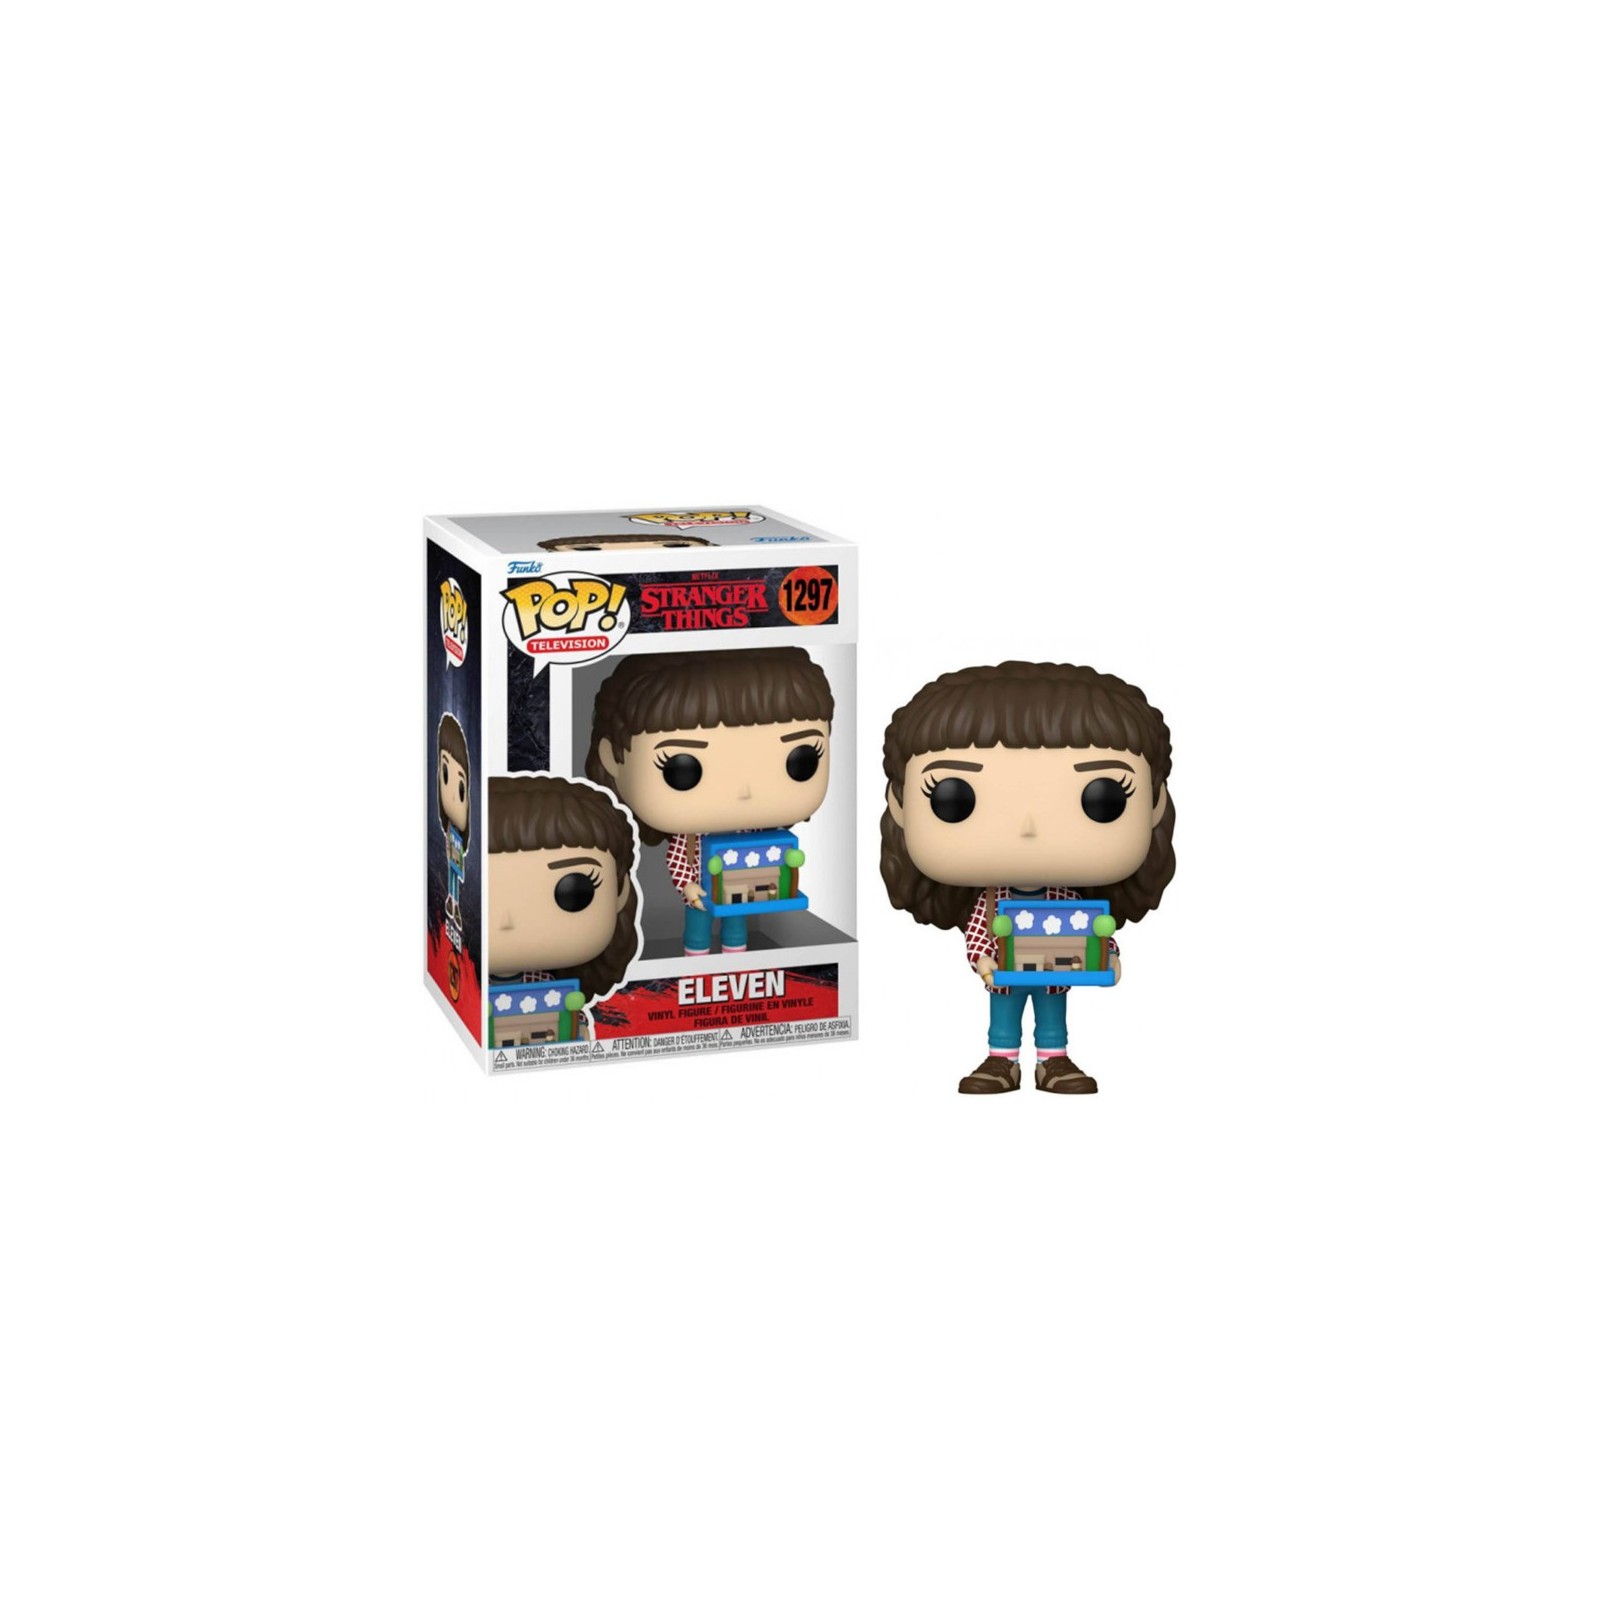 FUNKO POP! TELEVISION - STRANGER THINGS: ELEVEN (1297)